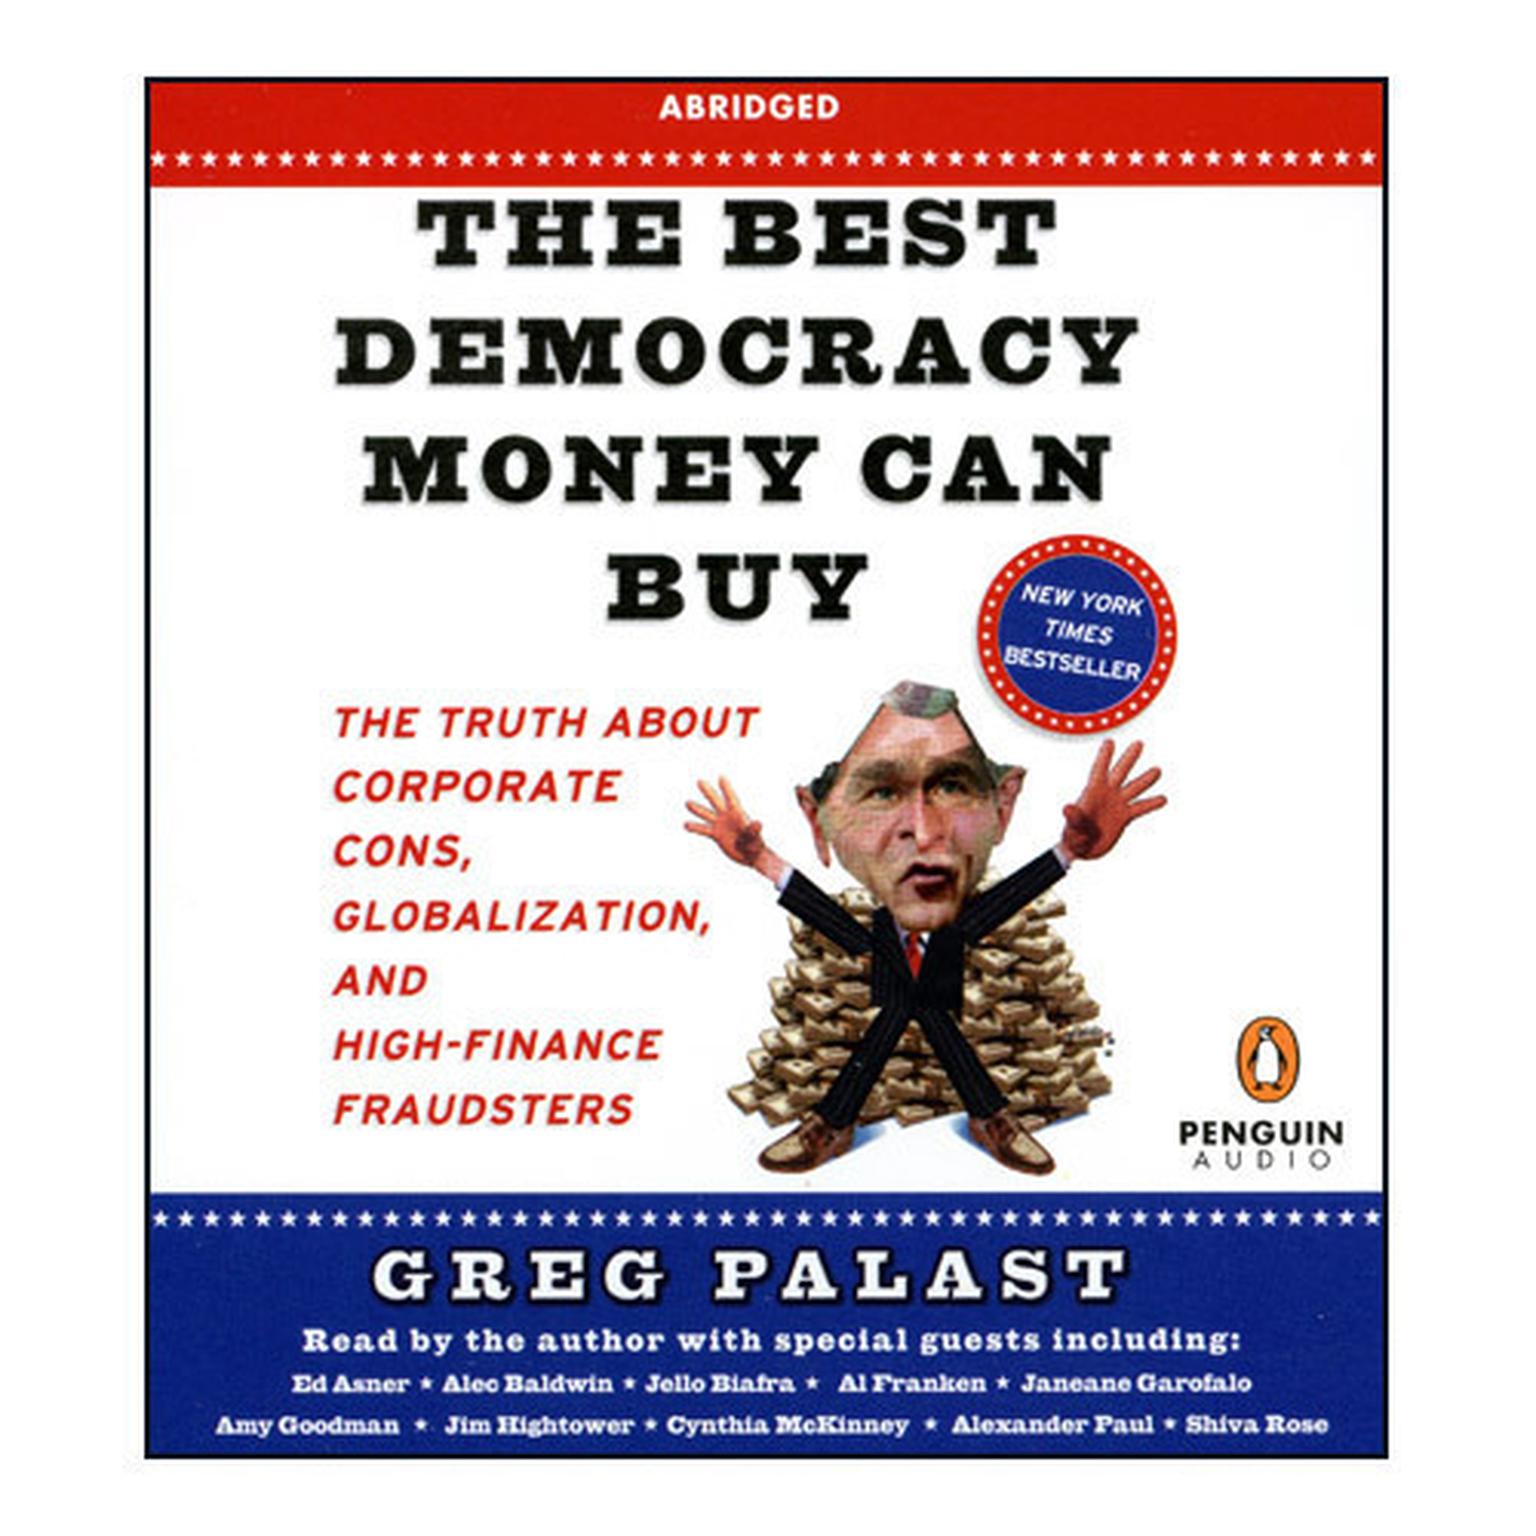 The Best Democracy Money Can Buy (Abridged): The Truth About Corporate Cons, Globalization, and High-Finance Fraudsters Audiobook, by Greg Palast